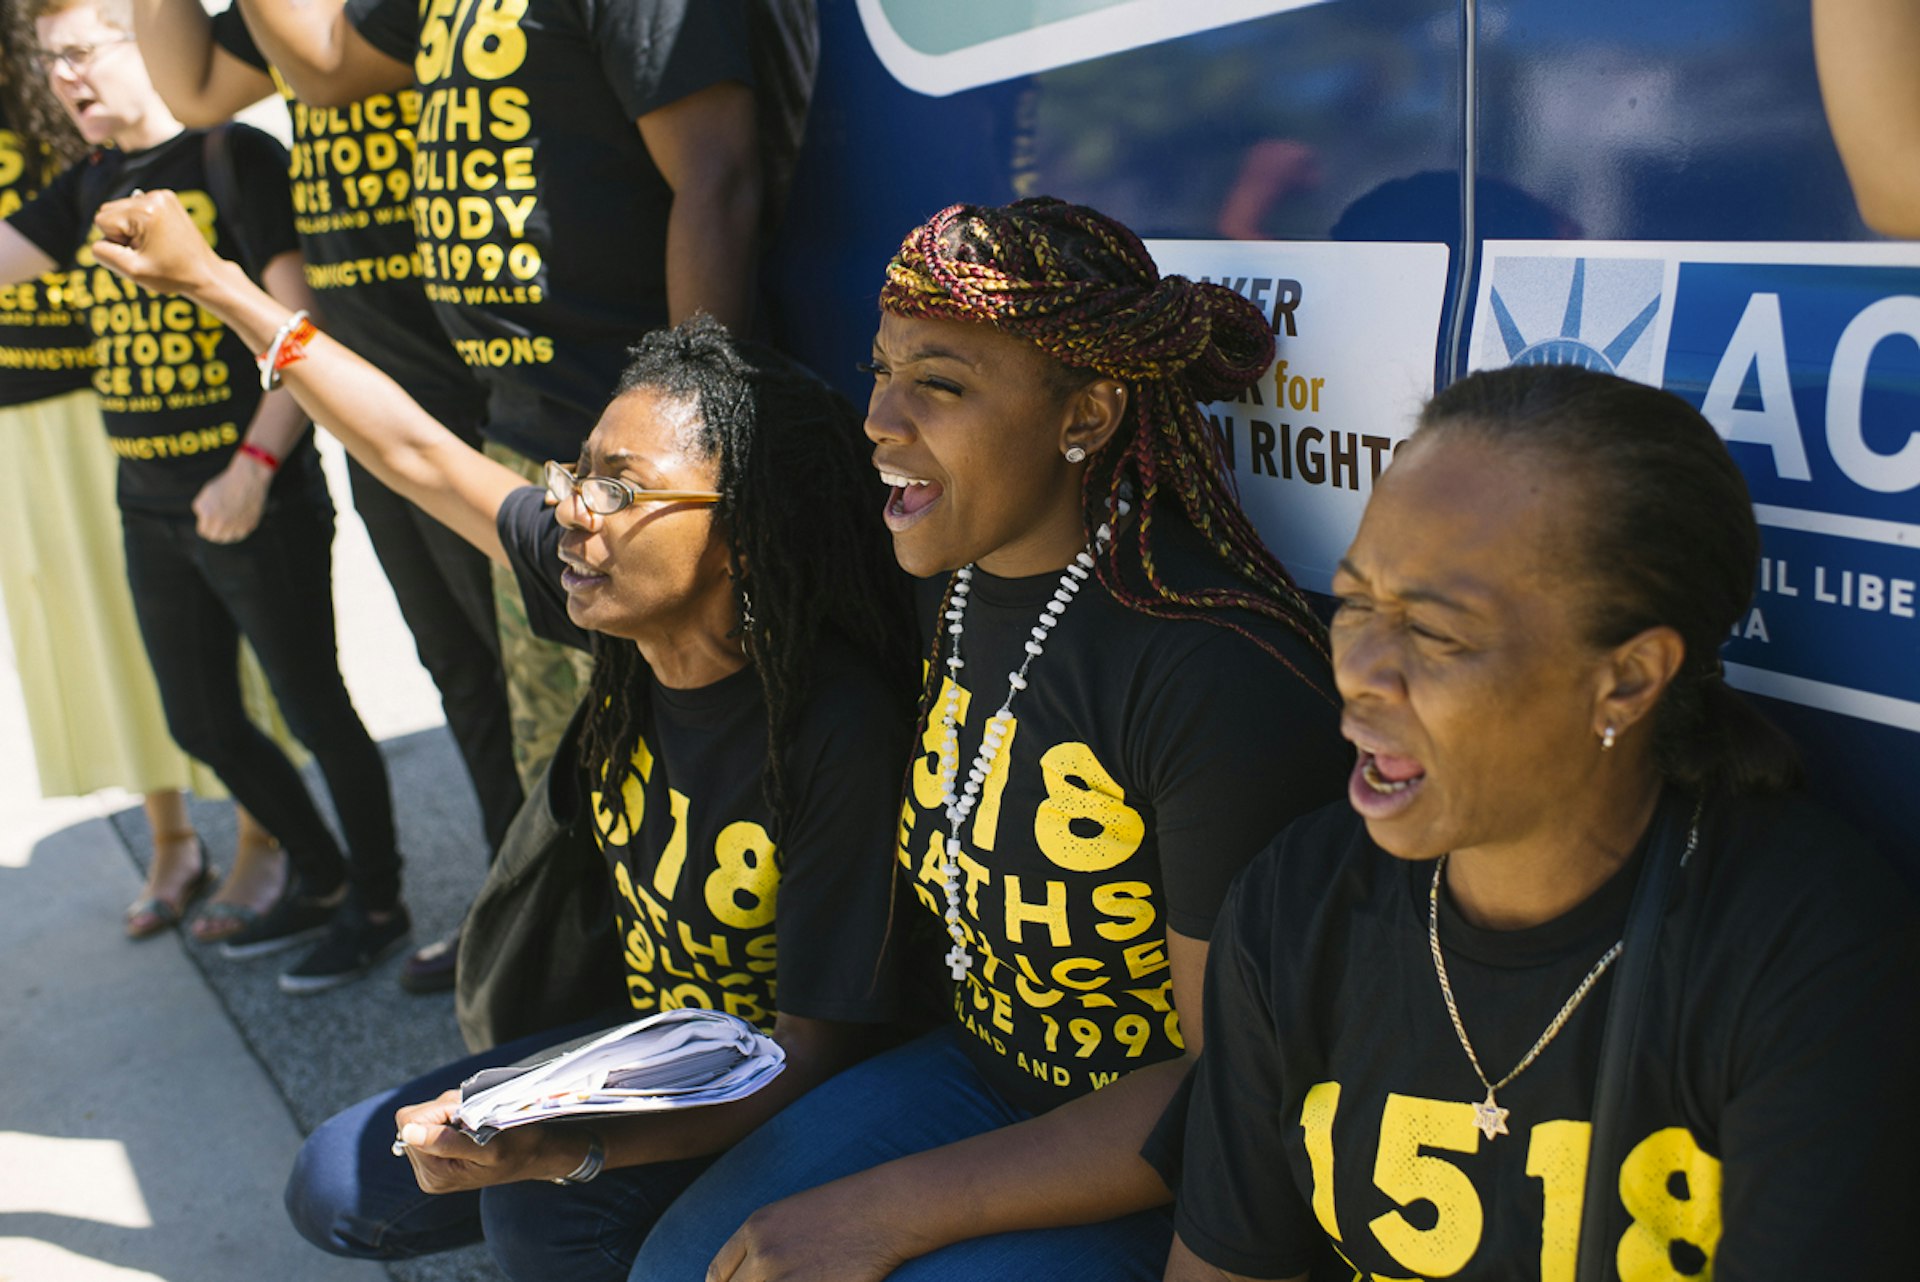 Justice activists join hands across the Atlantic to end police killings